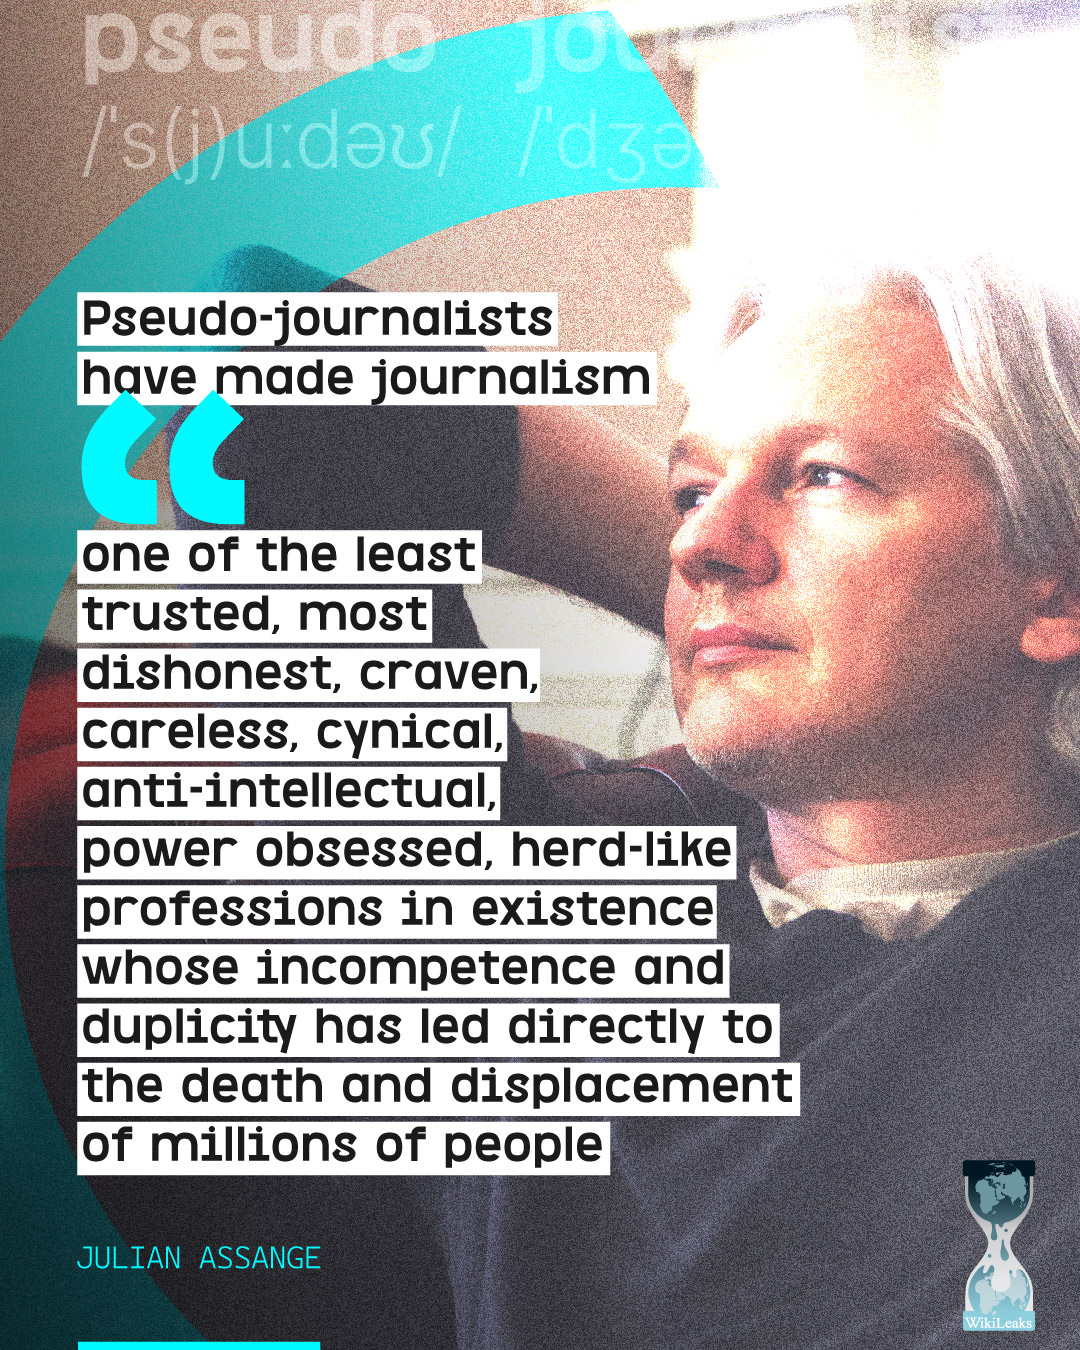 Pseudo-journalists have made journalism 'one of the least trusted, most dishonest, craven, careless, cynical, anti-intellectual, power obsessed, herd-like professions in existence whose incompetence and duplicity has led directly to the death and displacement of millions of people' - Julian Assange